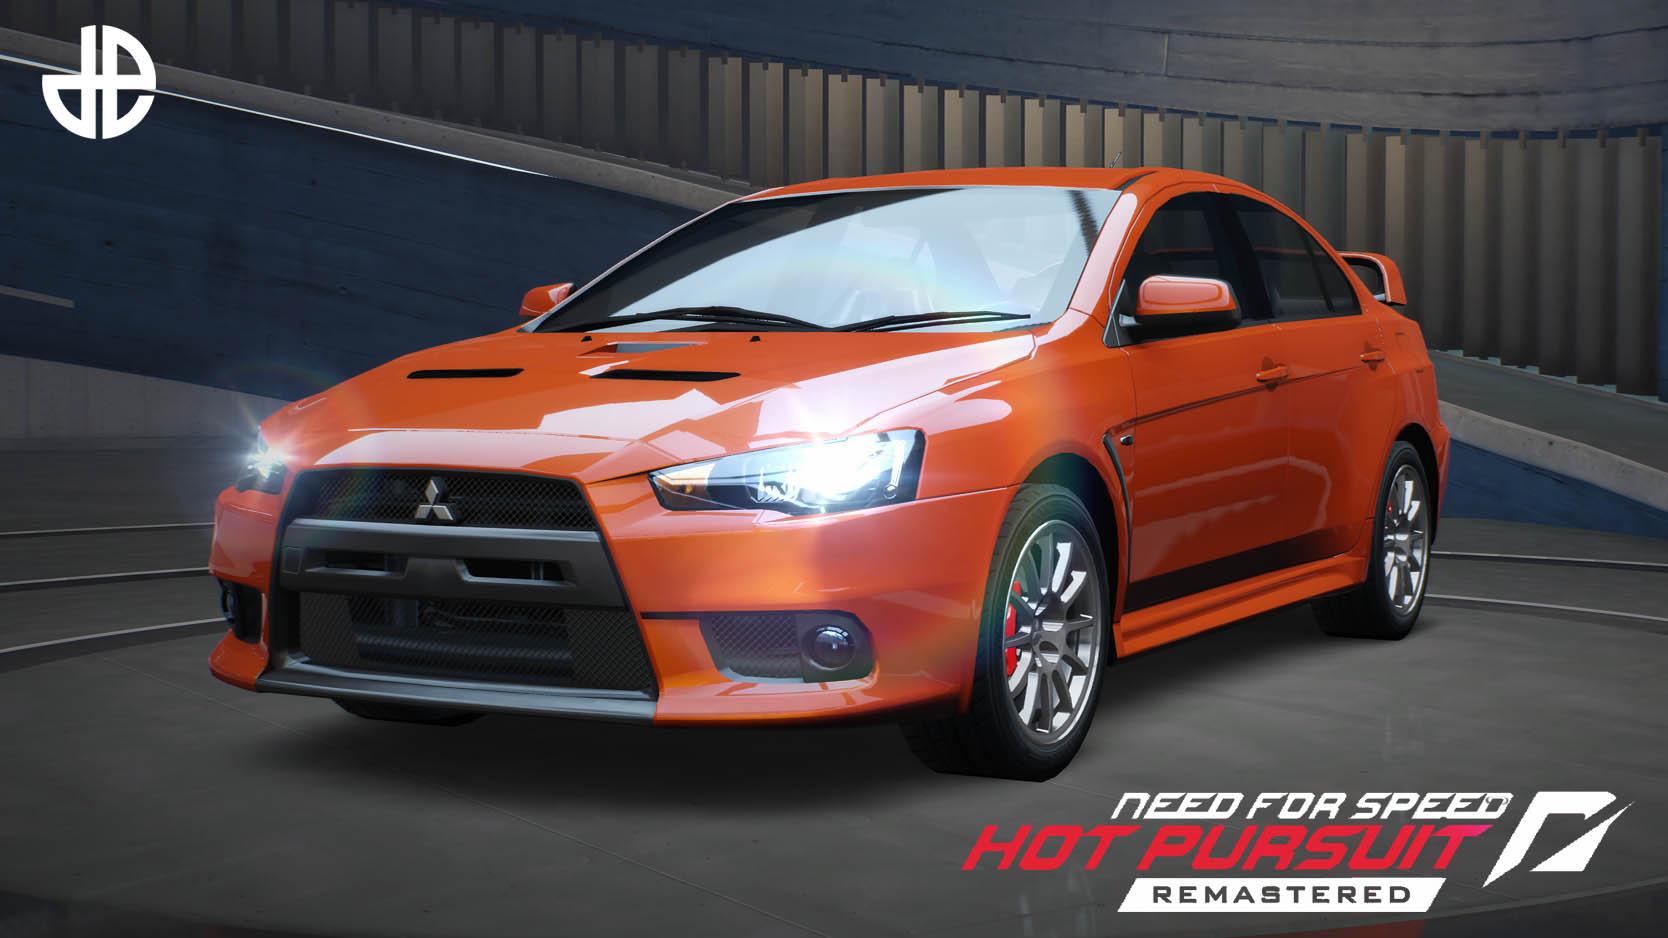 Why Need For Speed Hot Pursuit Remastered doesn\'t have car customization -  Dexerto